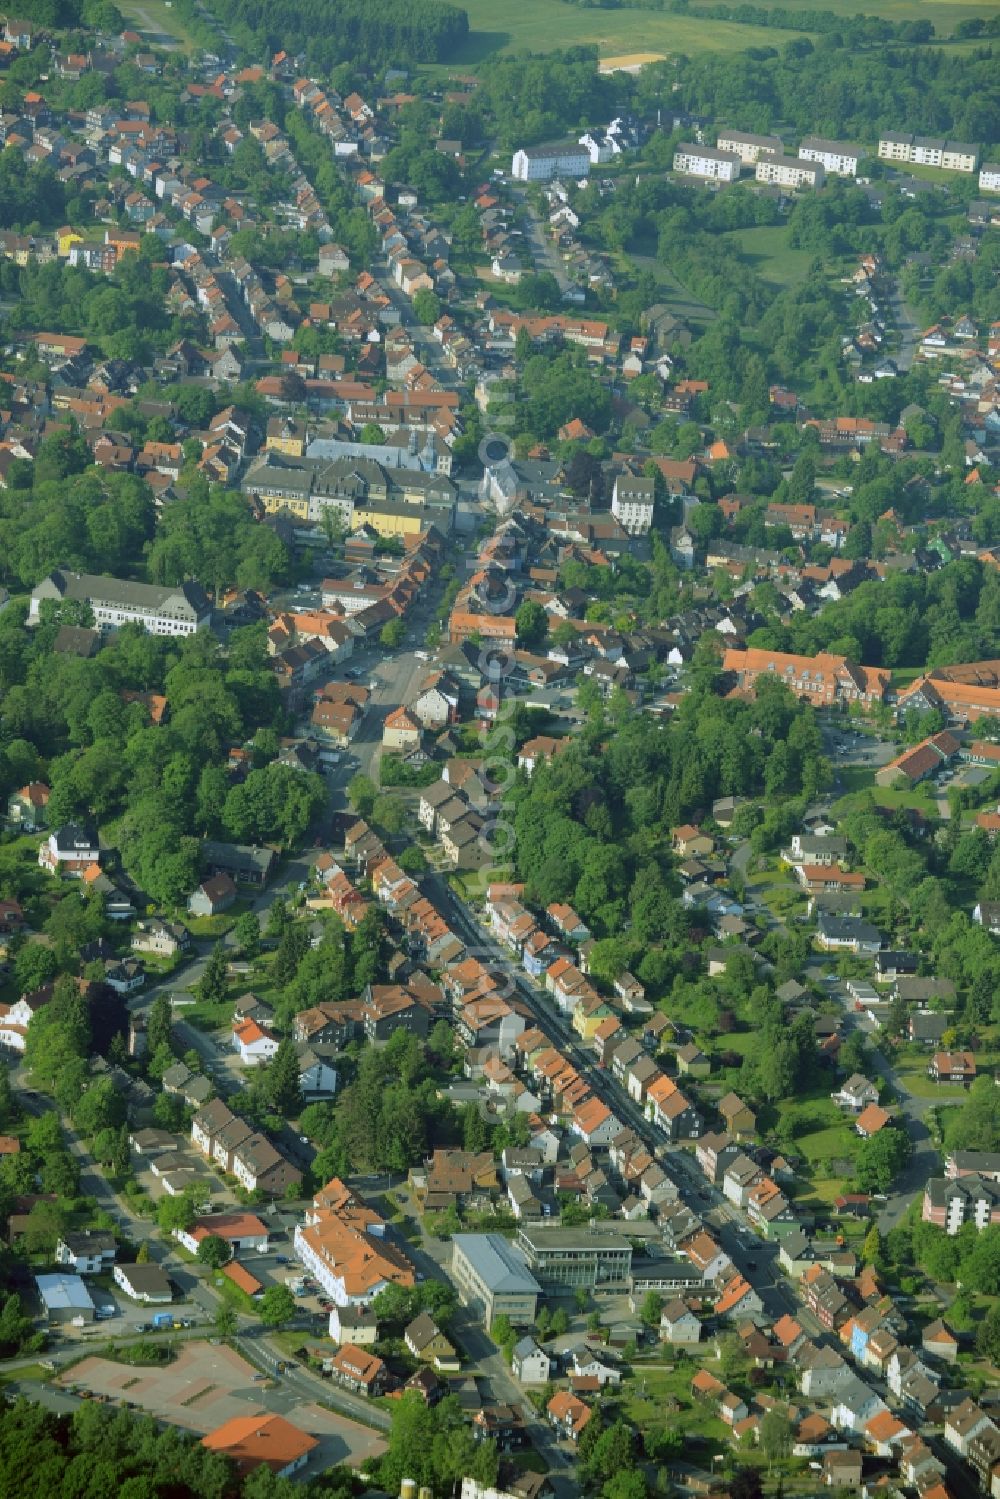 Clausthal-Zellerfeld from the bird's eye view: View of the Southwest of the town of Clausthal-Zellerfeld in the state of Lower Saxony. The mountain and university town is an official spa resort in the county district of Goslar. A residential area is located in its Southwest. View along Adolph-Roemer-Strasse where the church Marktkirche zum Heiligen Geist is located